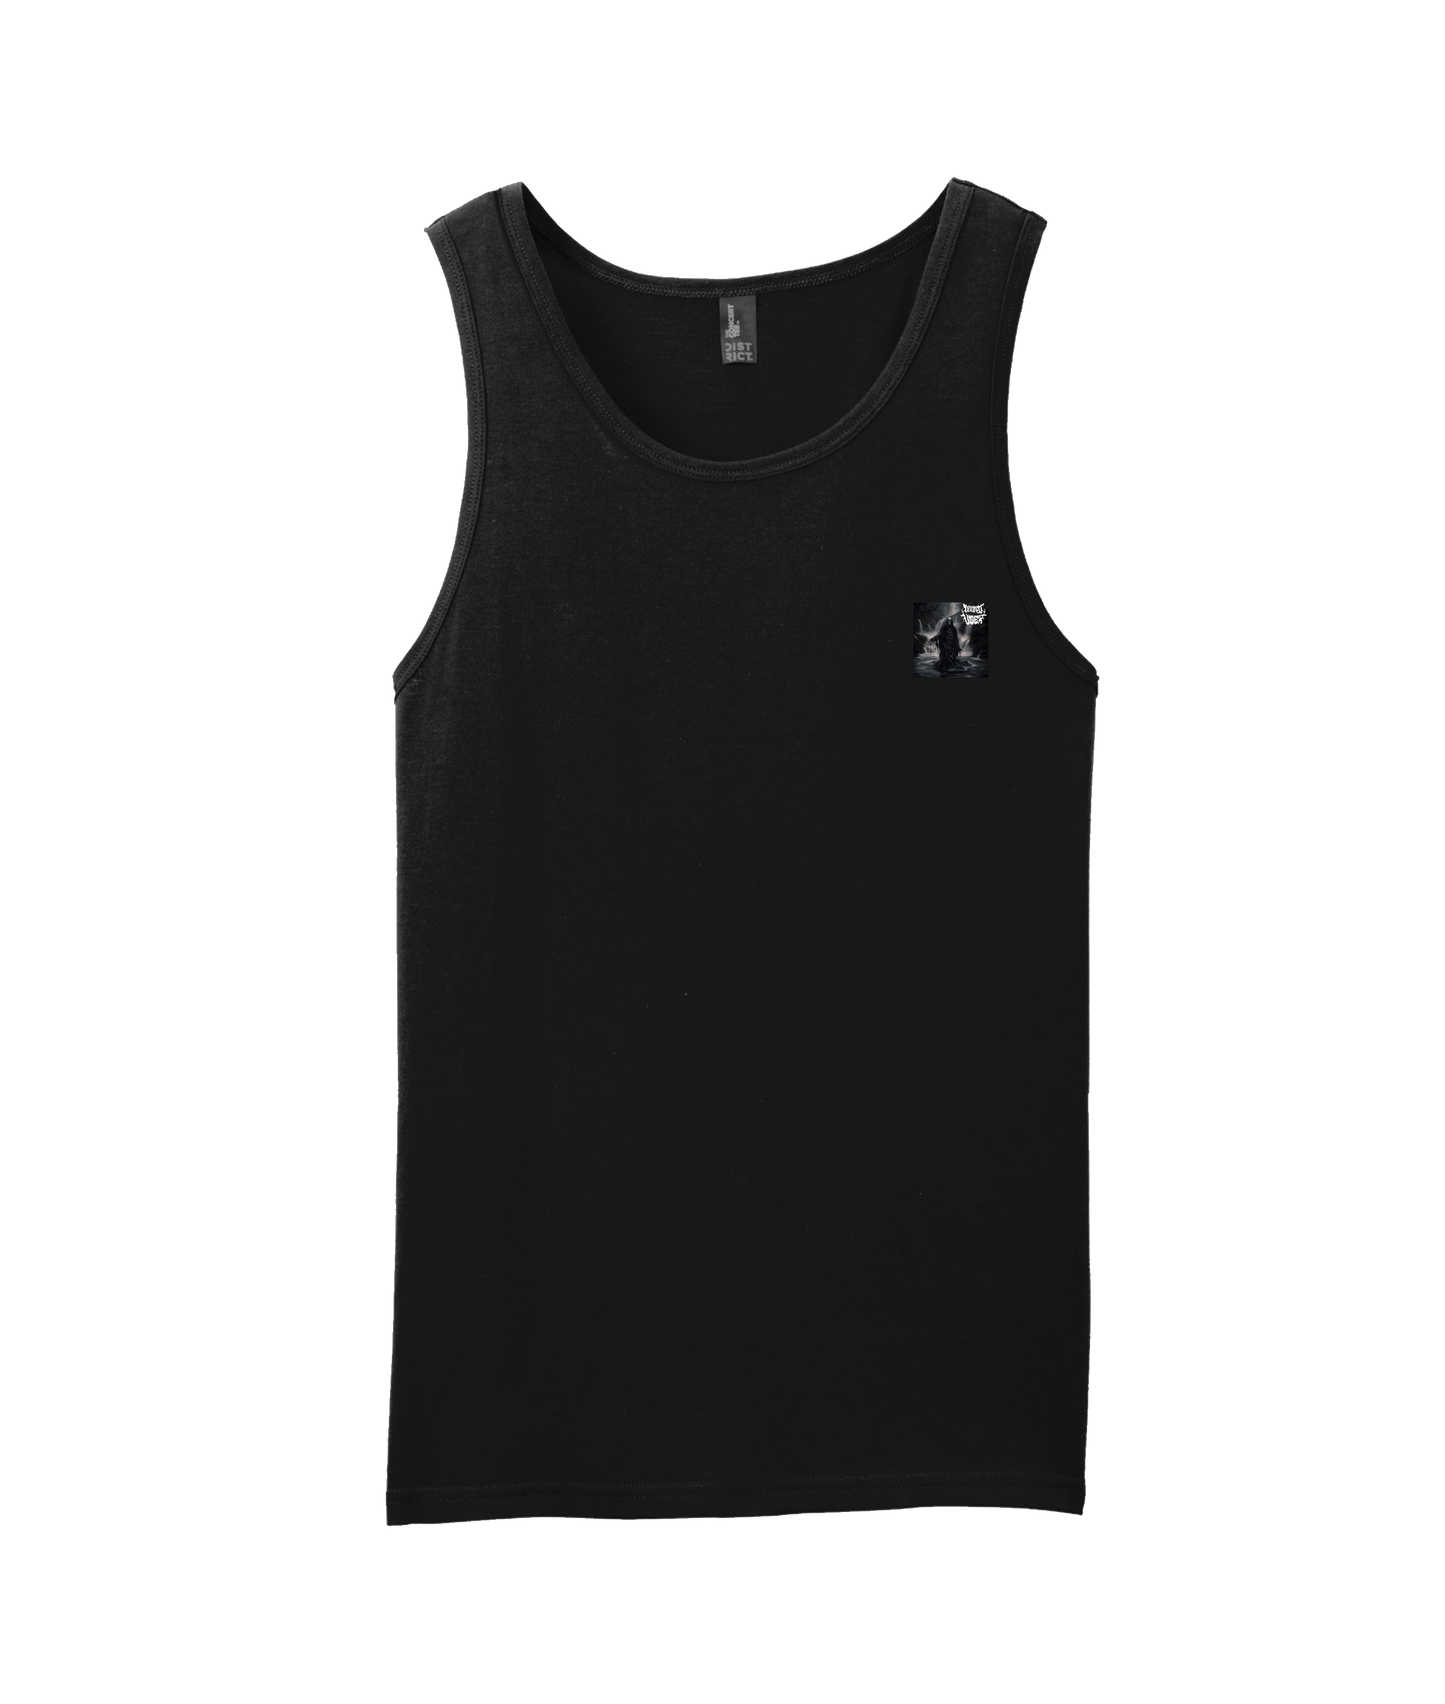 Doomed User - Cryptic Tomb - Black Tank Top